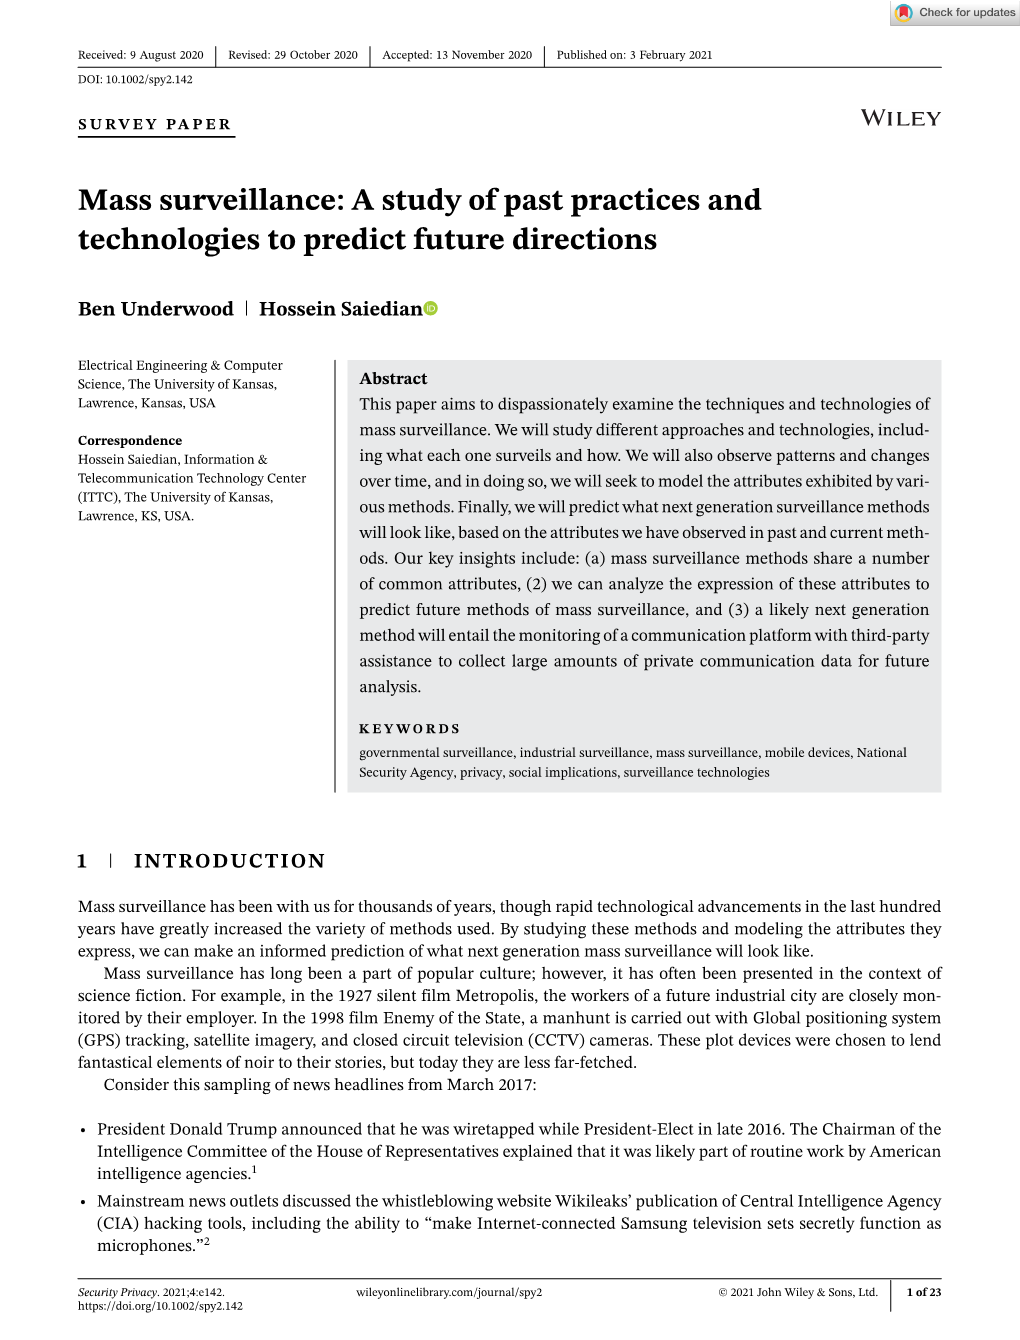 Mass Surveillance: a Study of Past Practices and Technologies to Predict Future Directions